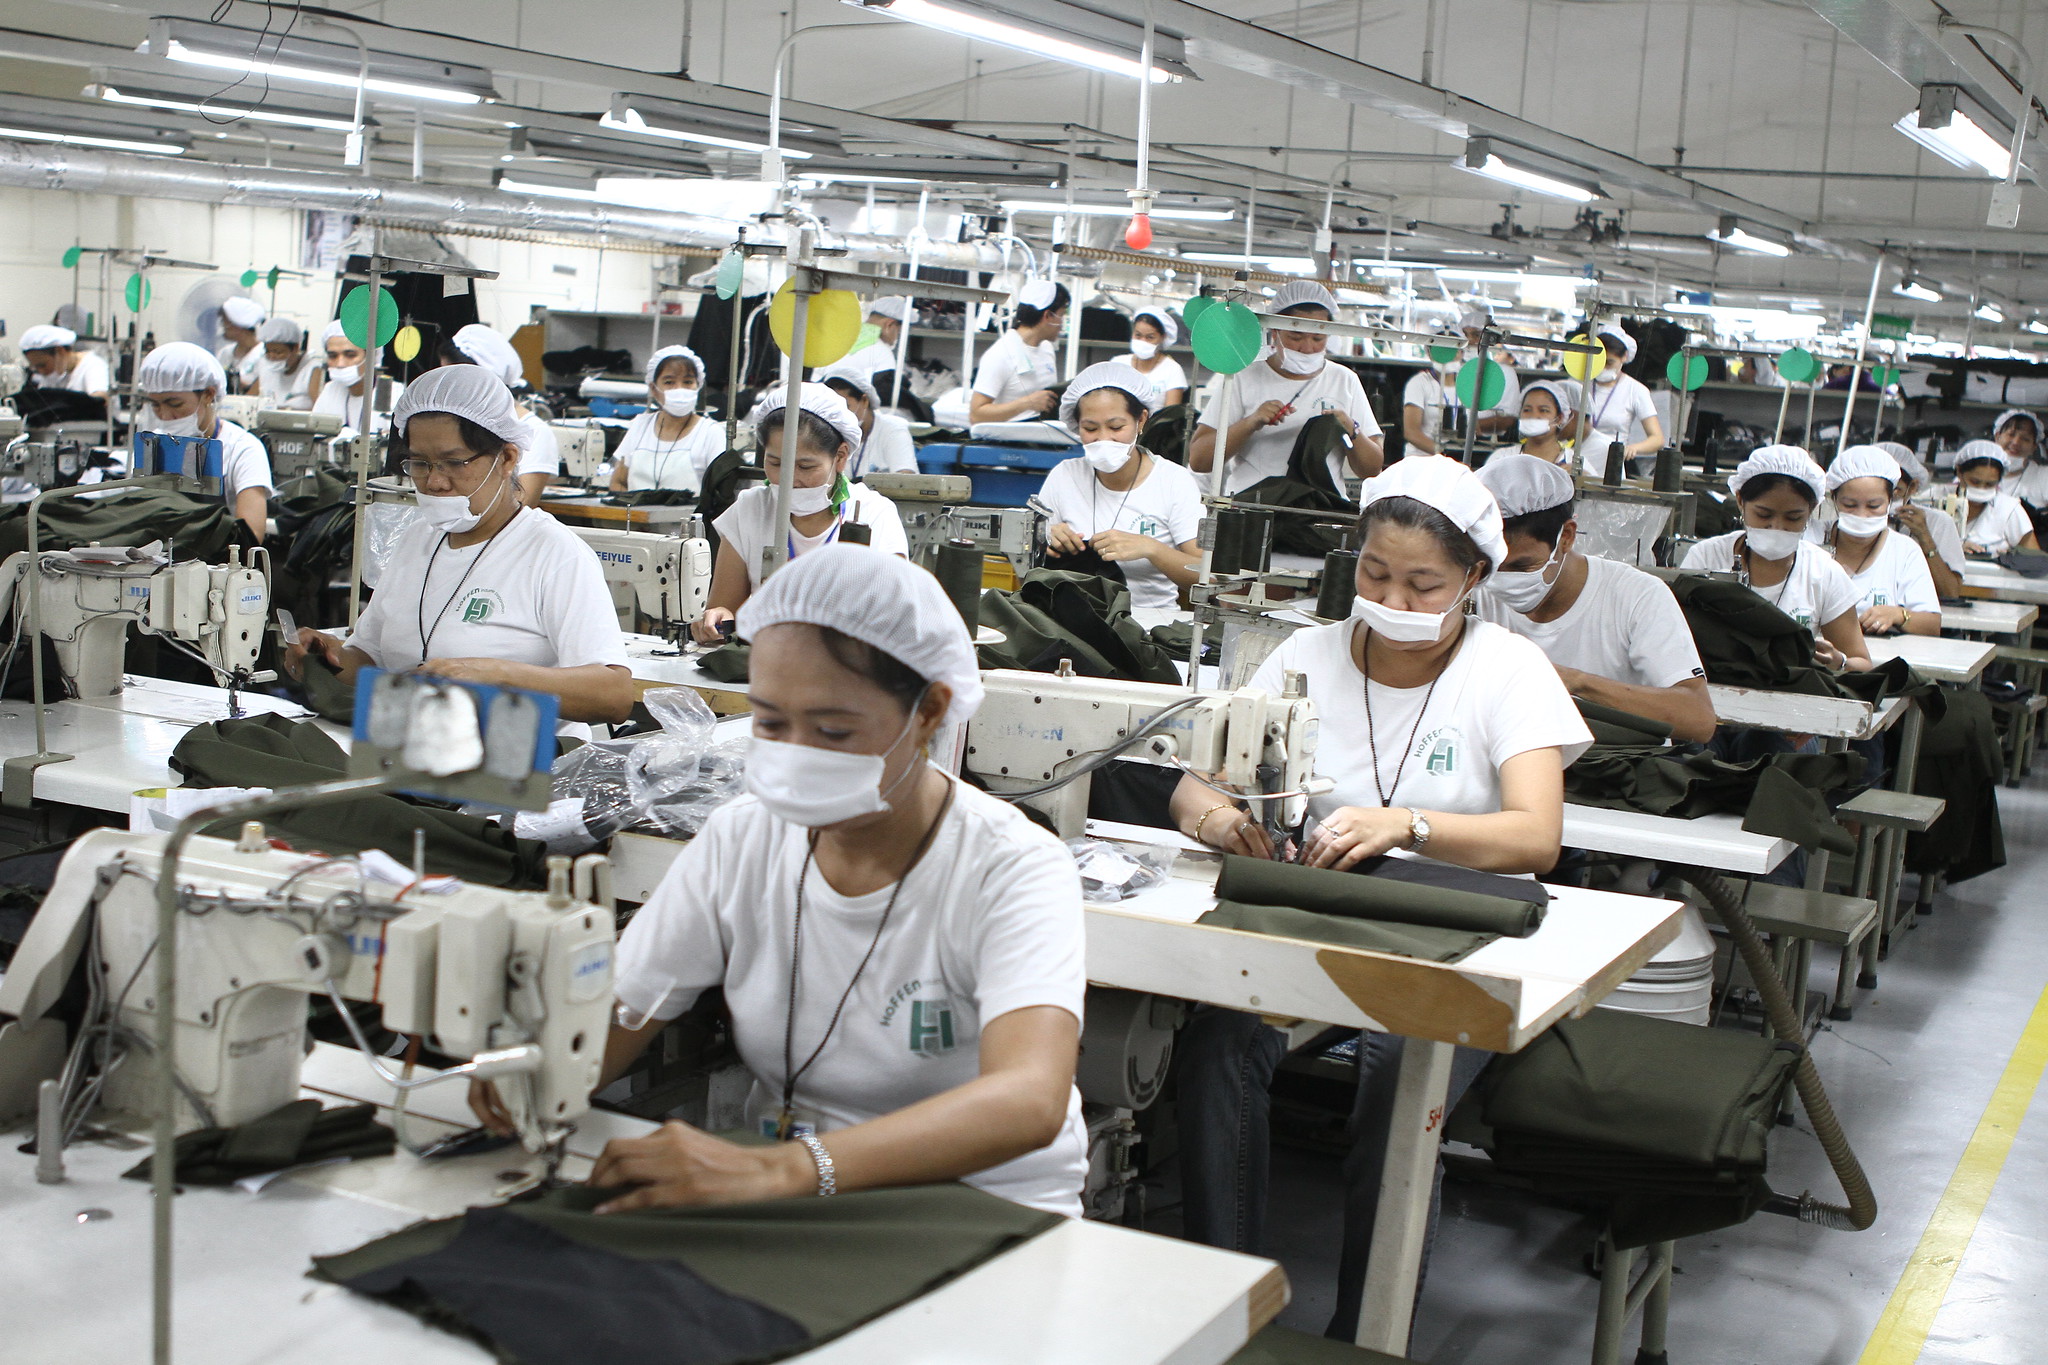 Garment workers with masks in Philippine factory